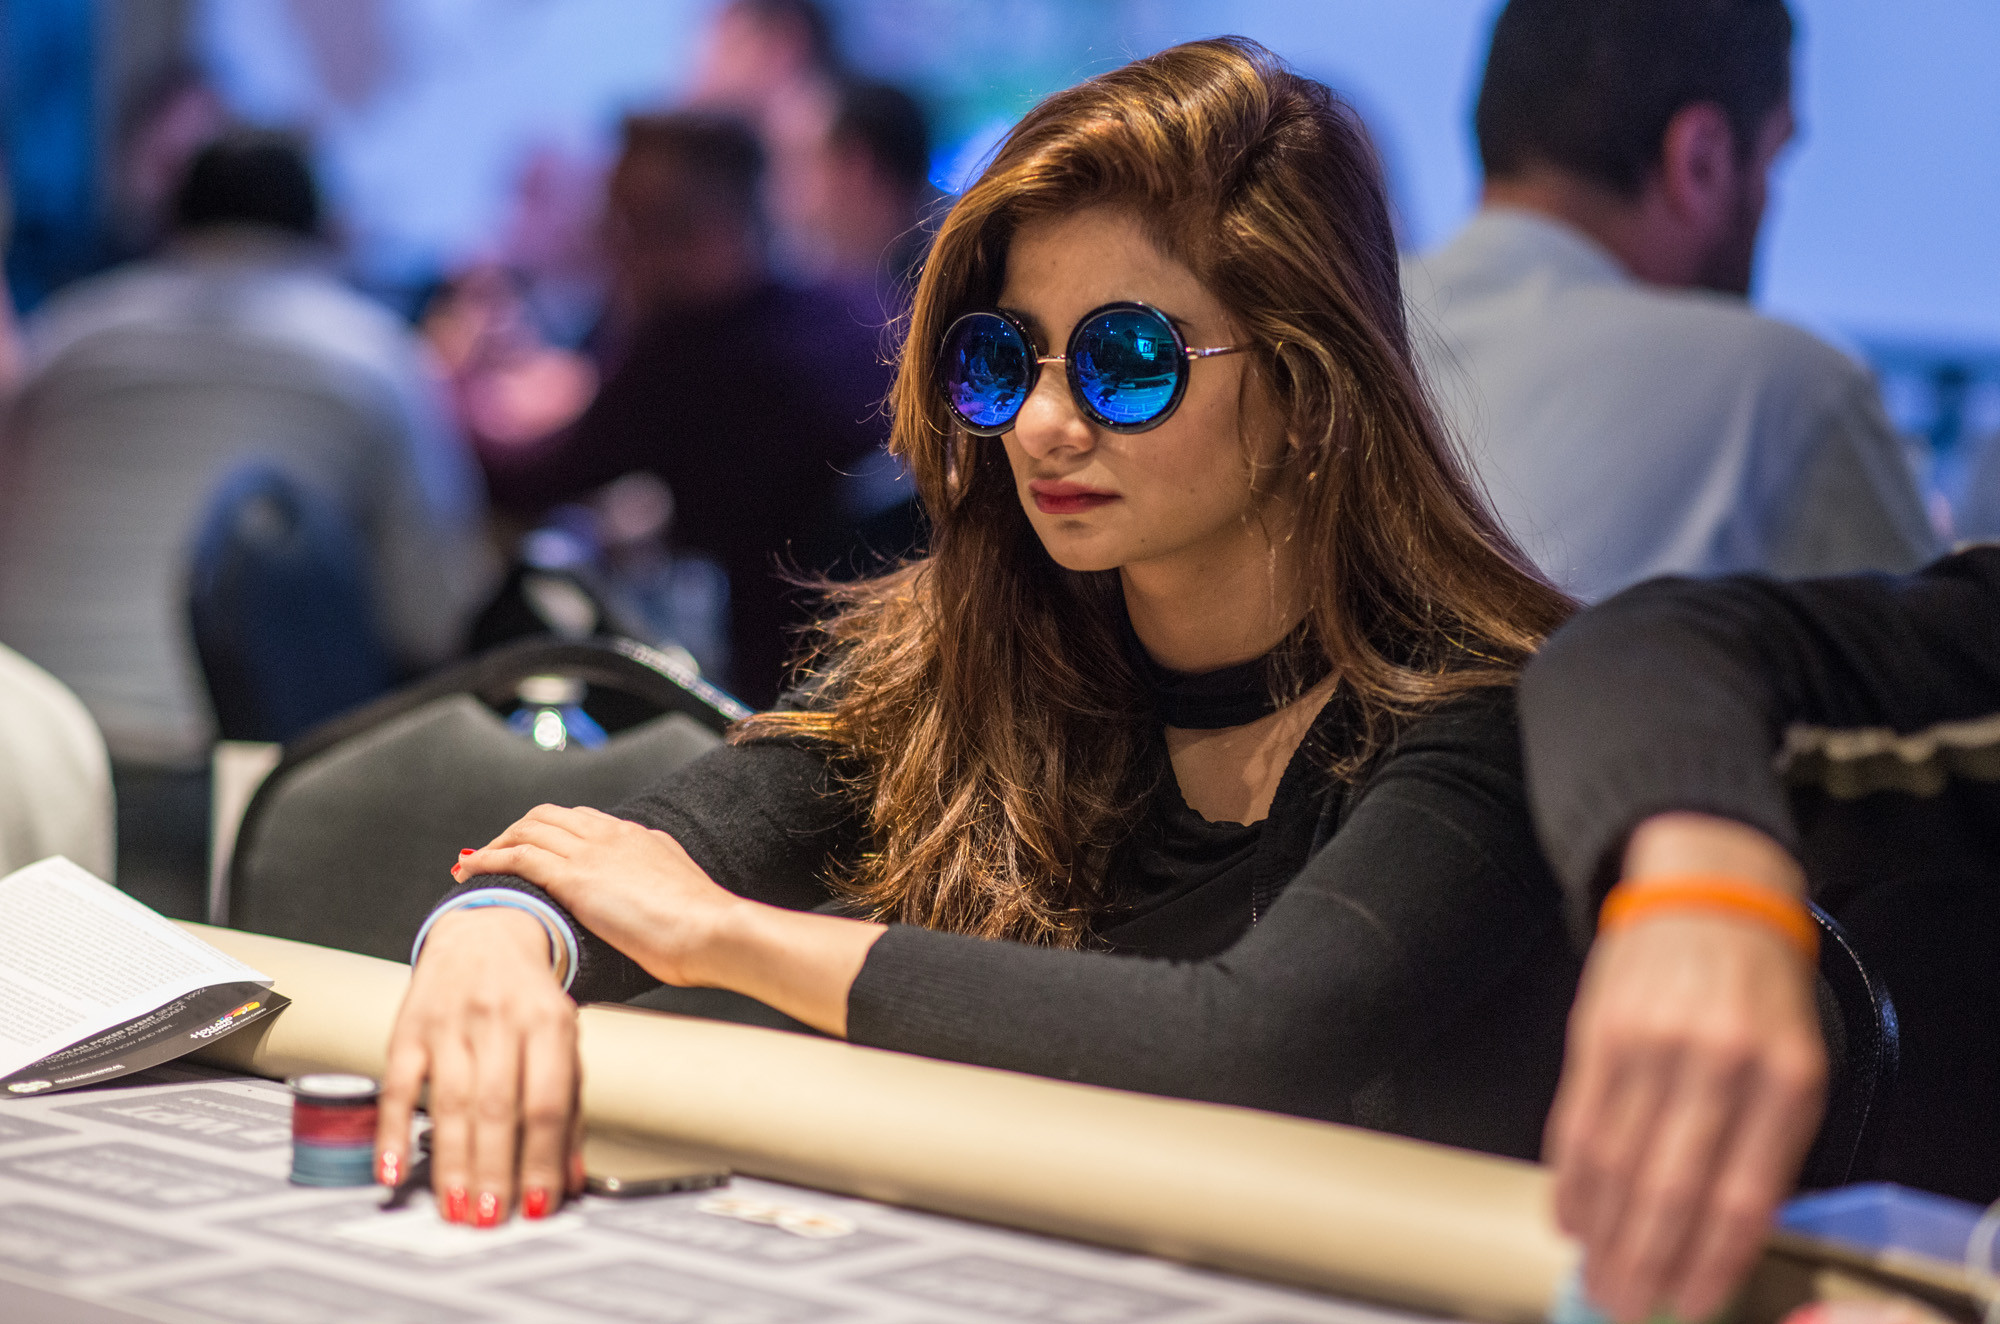 Indian Poker Site Challenges Gender Stereotypes by Sponsoring Female Players